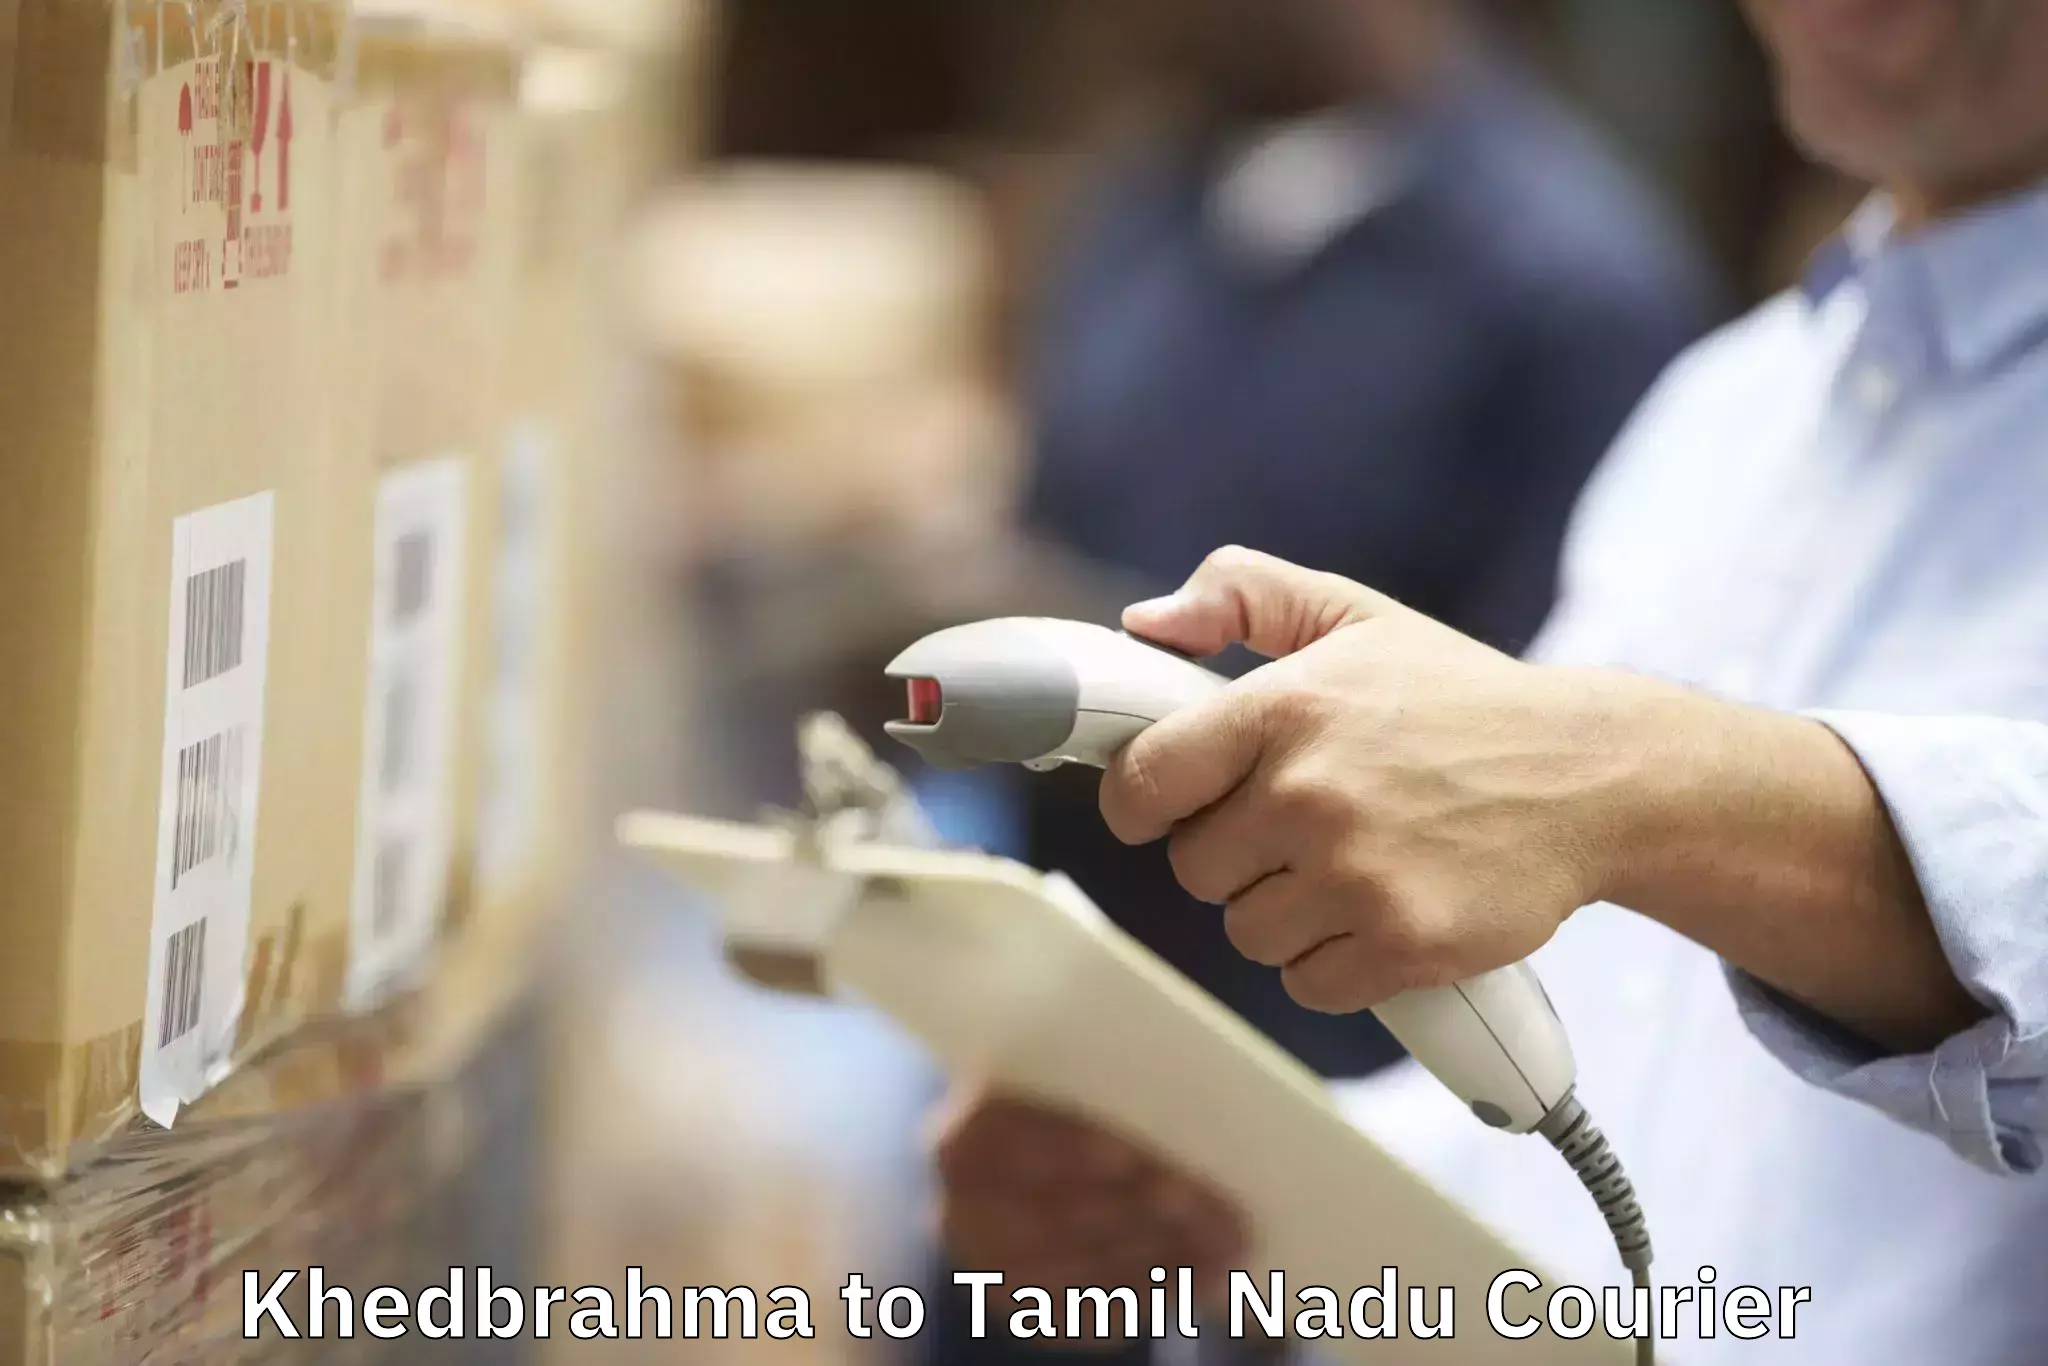 Specialized moving company in Khedbrahma to Tamil Nadu